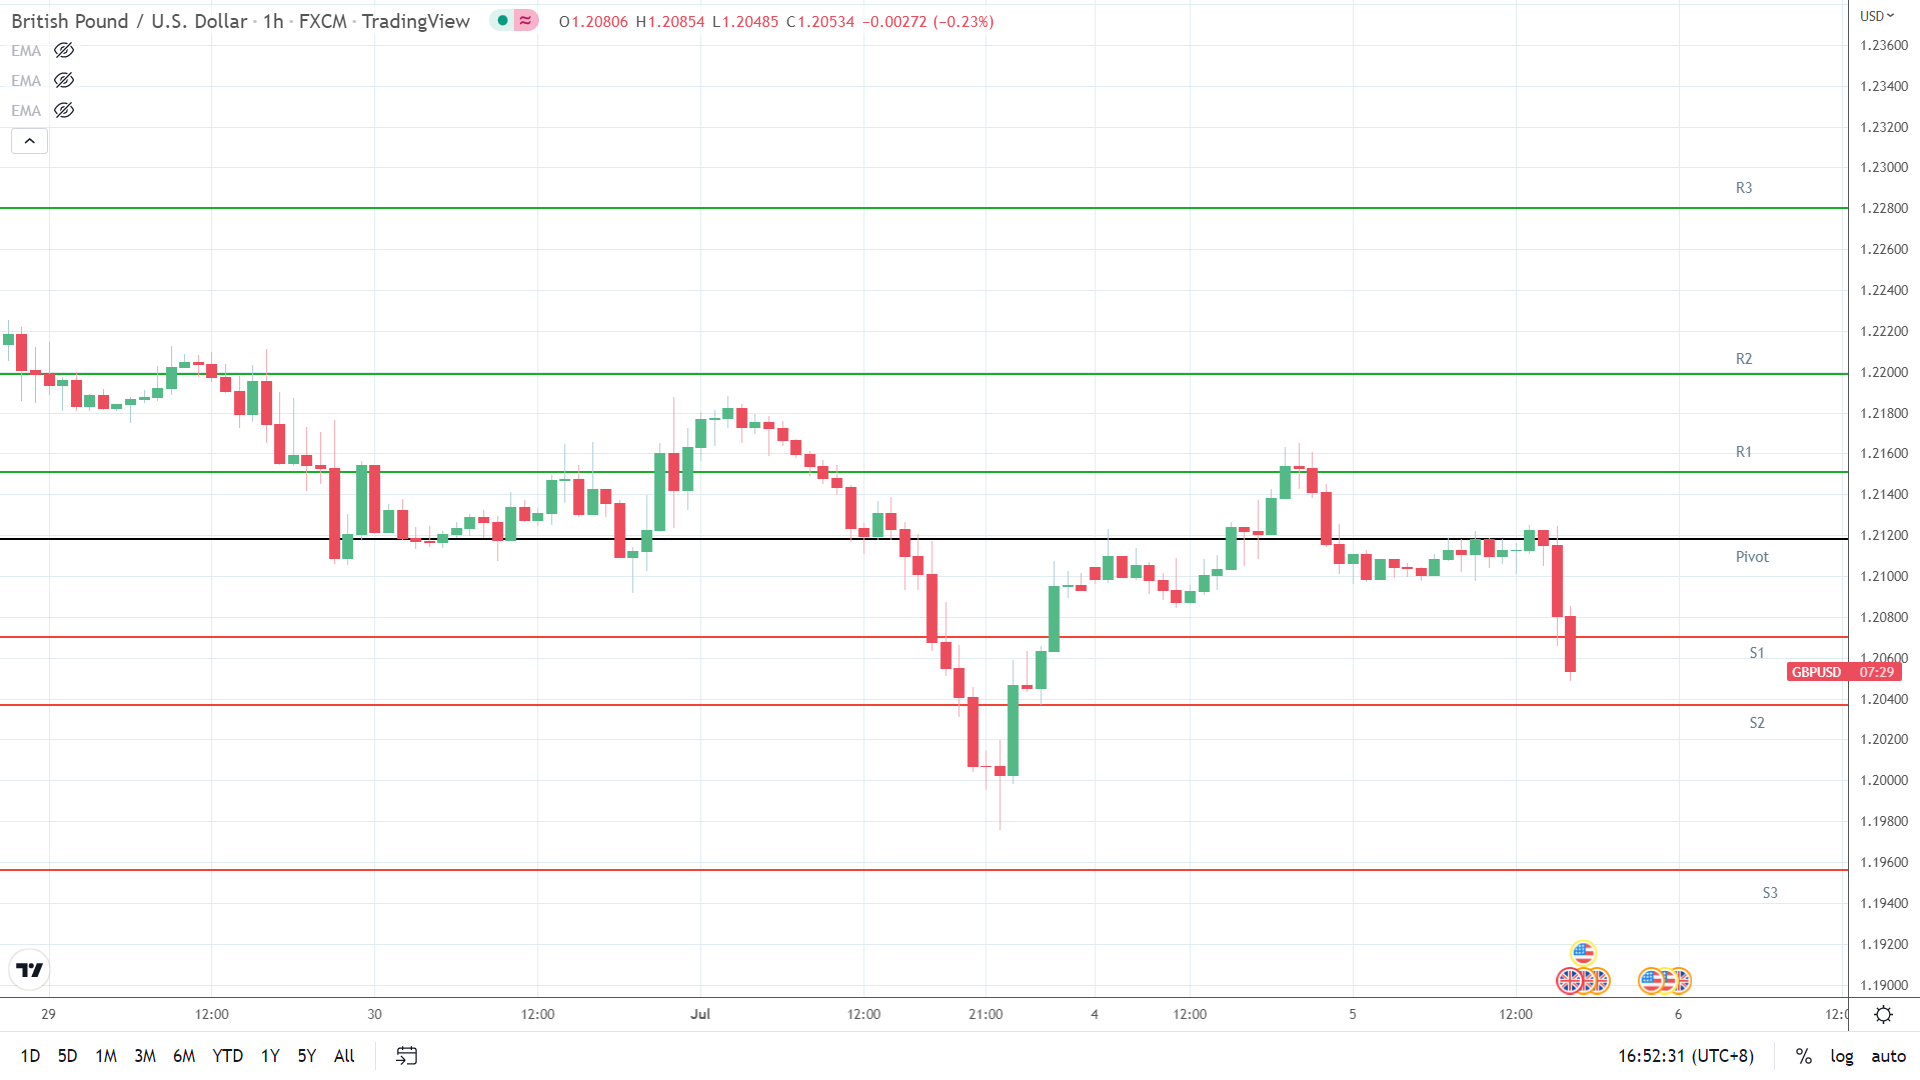 GBP/USD support levels in play